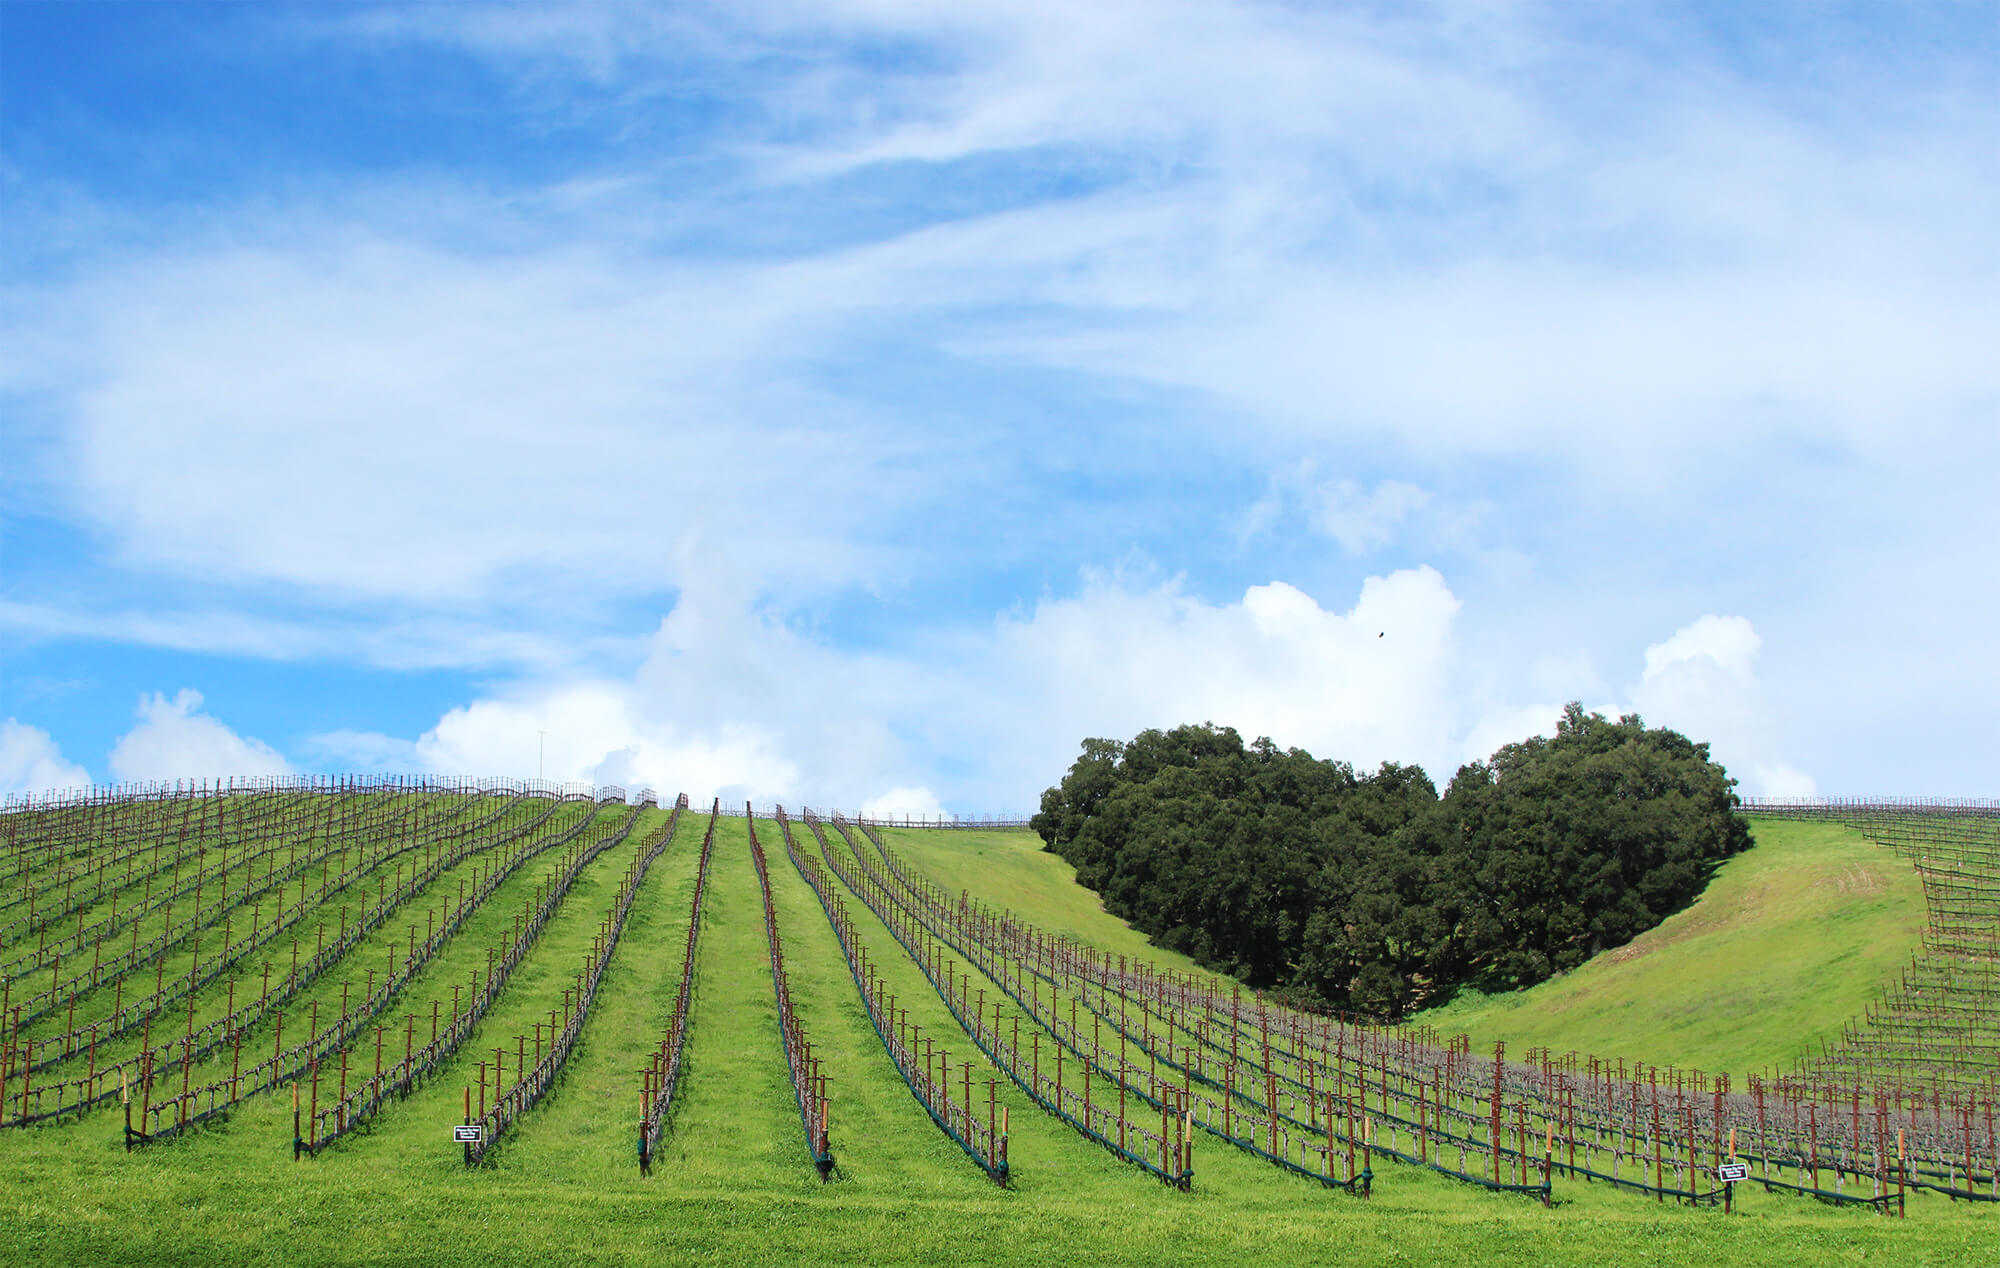 Heart Hill Vineyard with bright green grass, bright blue skies and wispy clouds